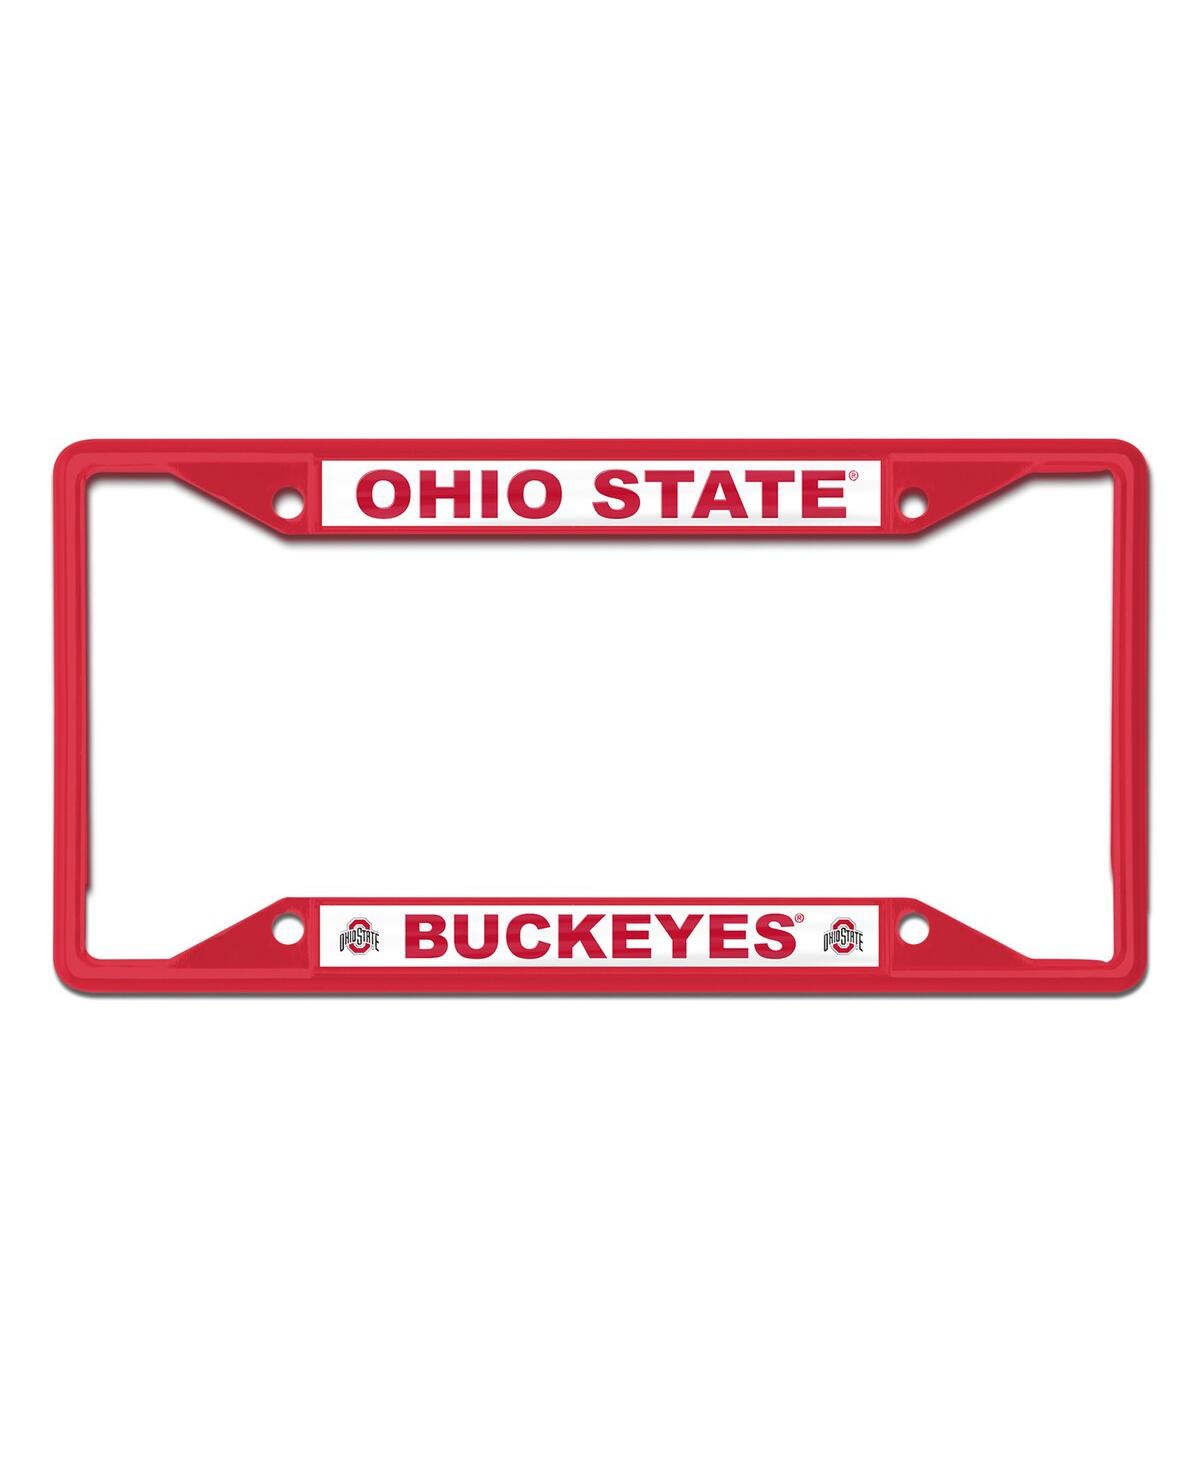 Ohio State Buckeyes Chrome Color License Plate Frame - Red